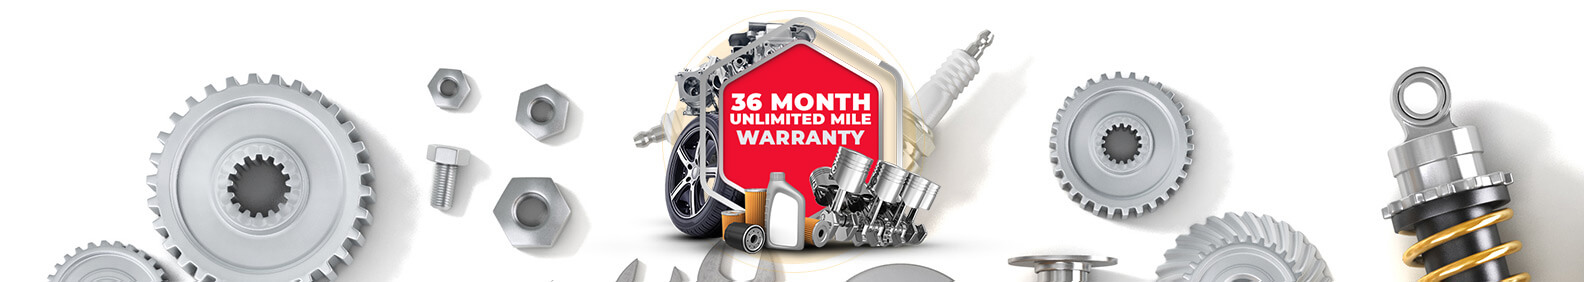 Warranty - Autoworks Of Issaquah